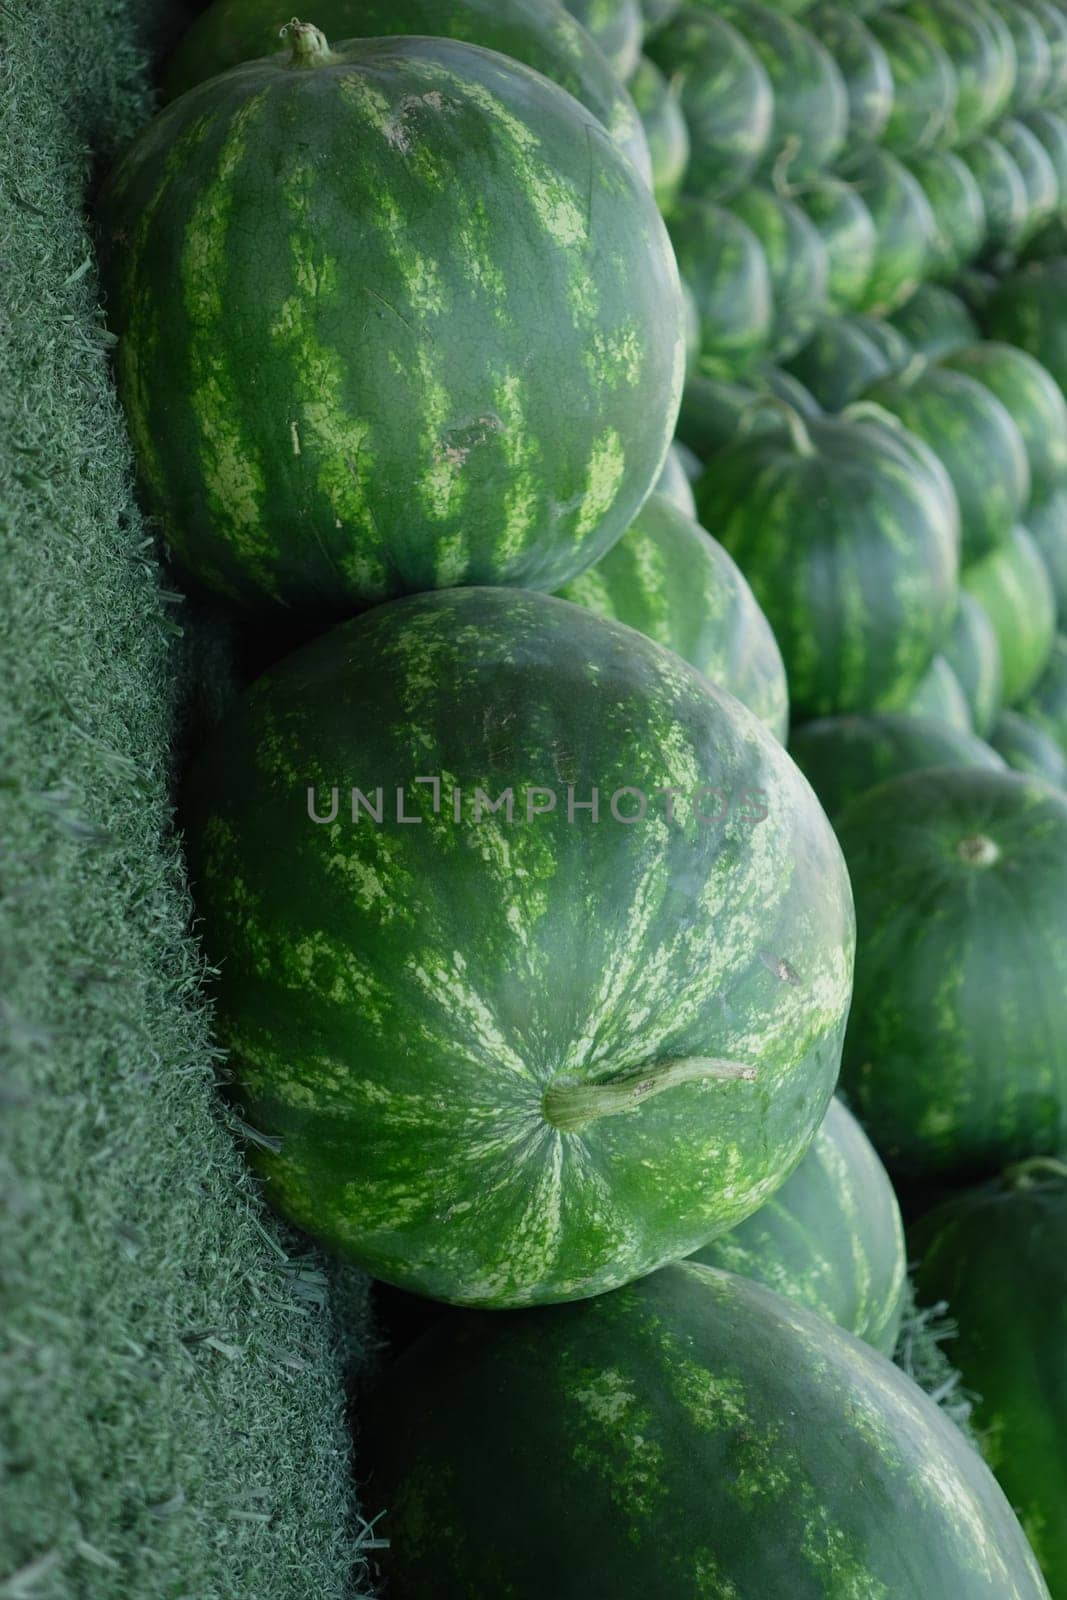 A pile of striped watermelons.